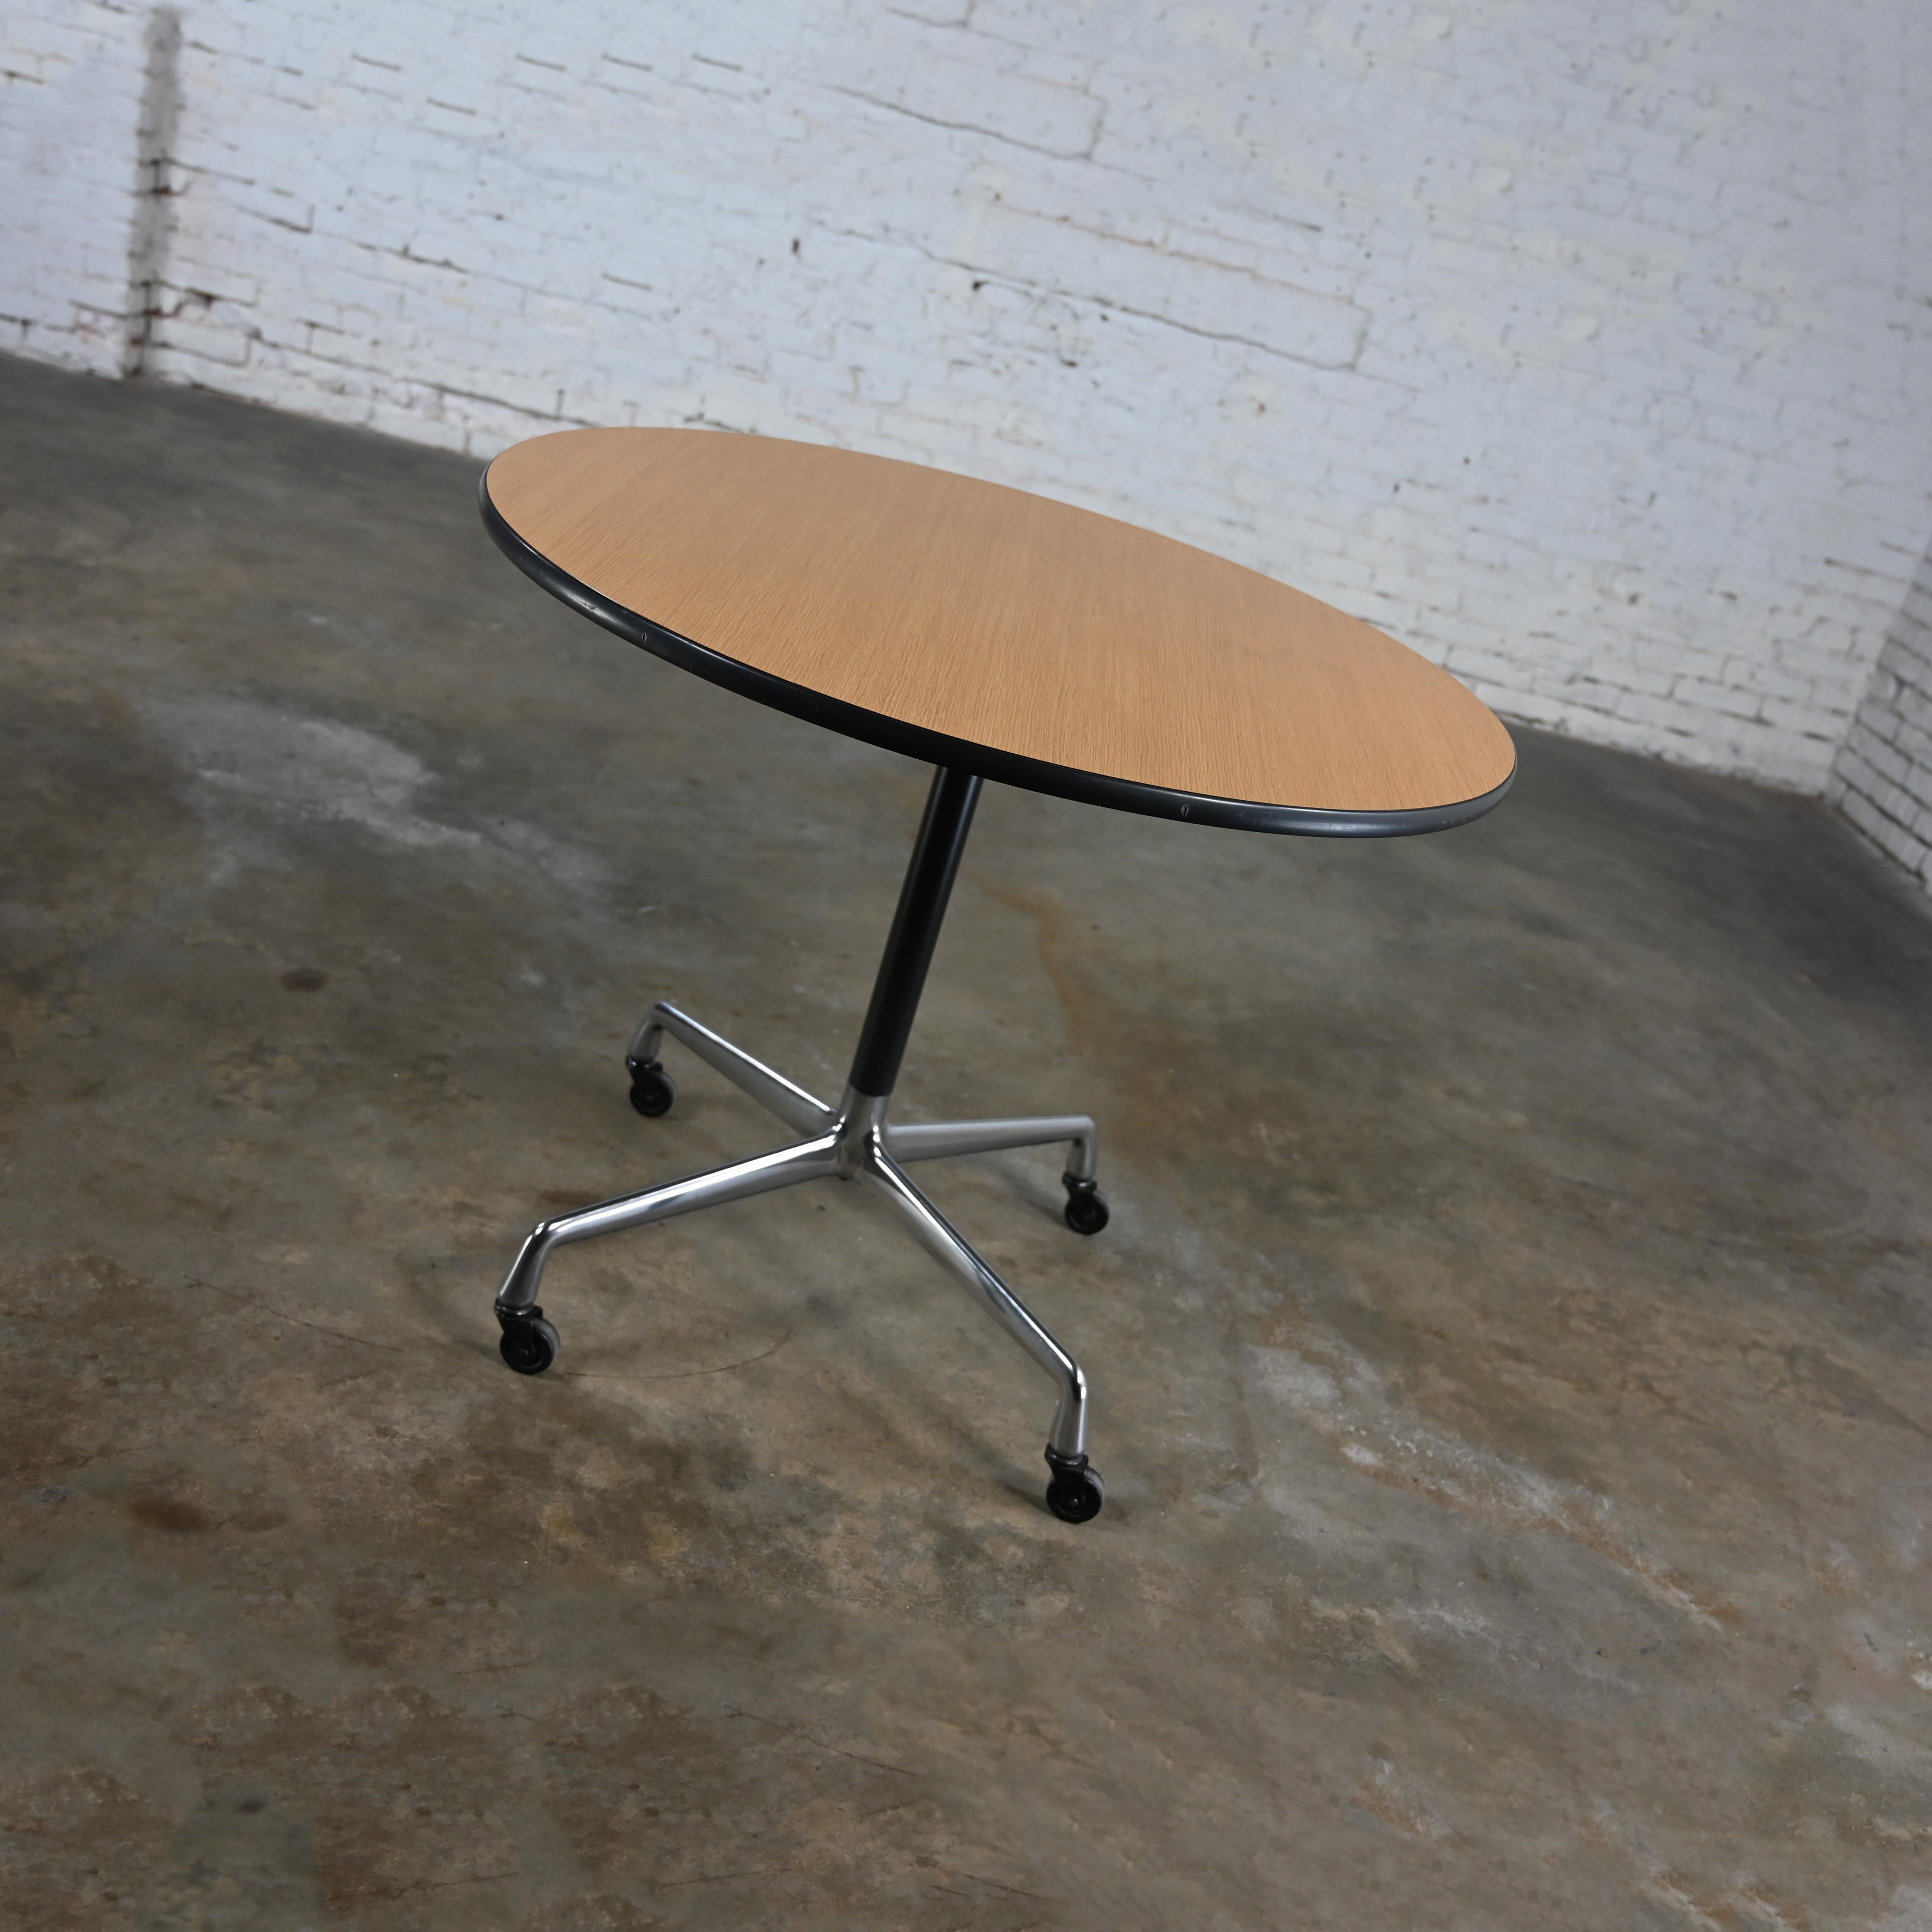 Eames Herman Miller Round Table Universal Base Casters & 36” Blonde Laminate Top For Sale 10